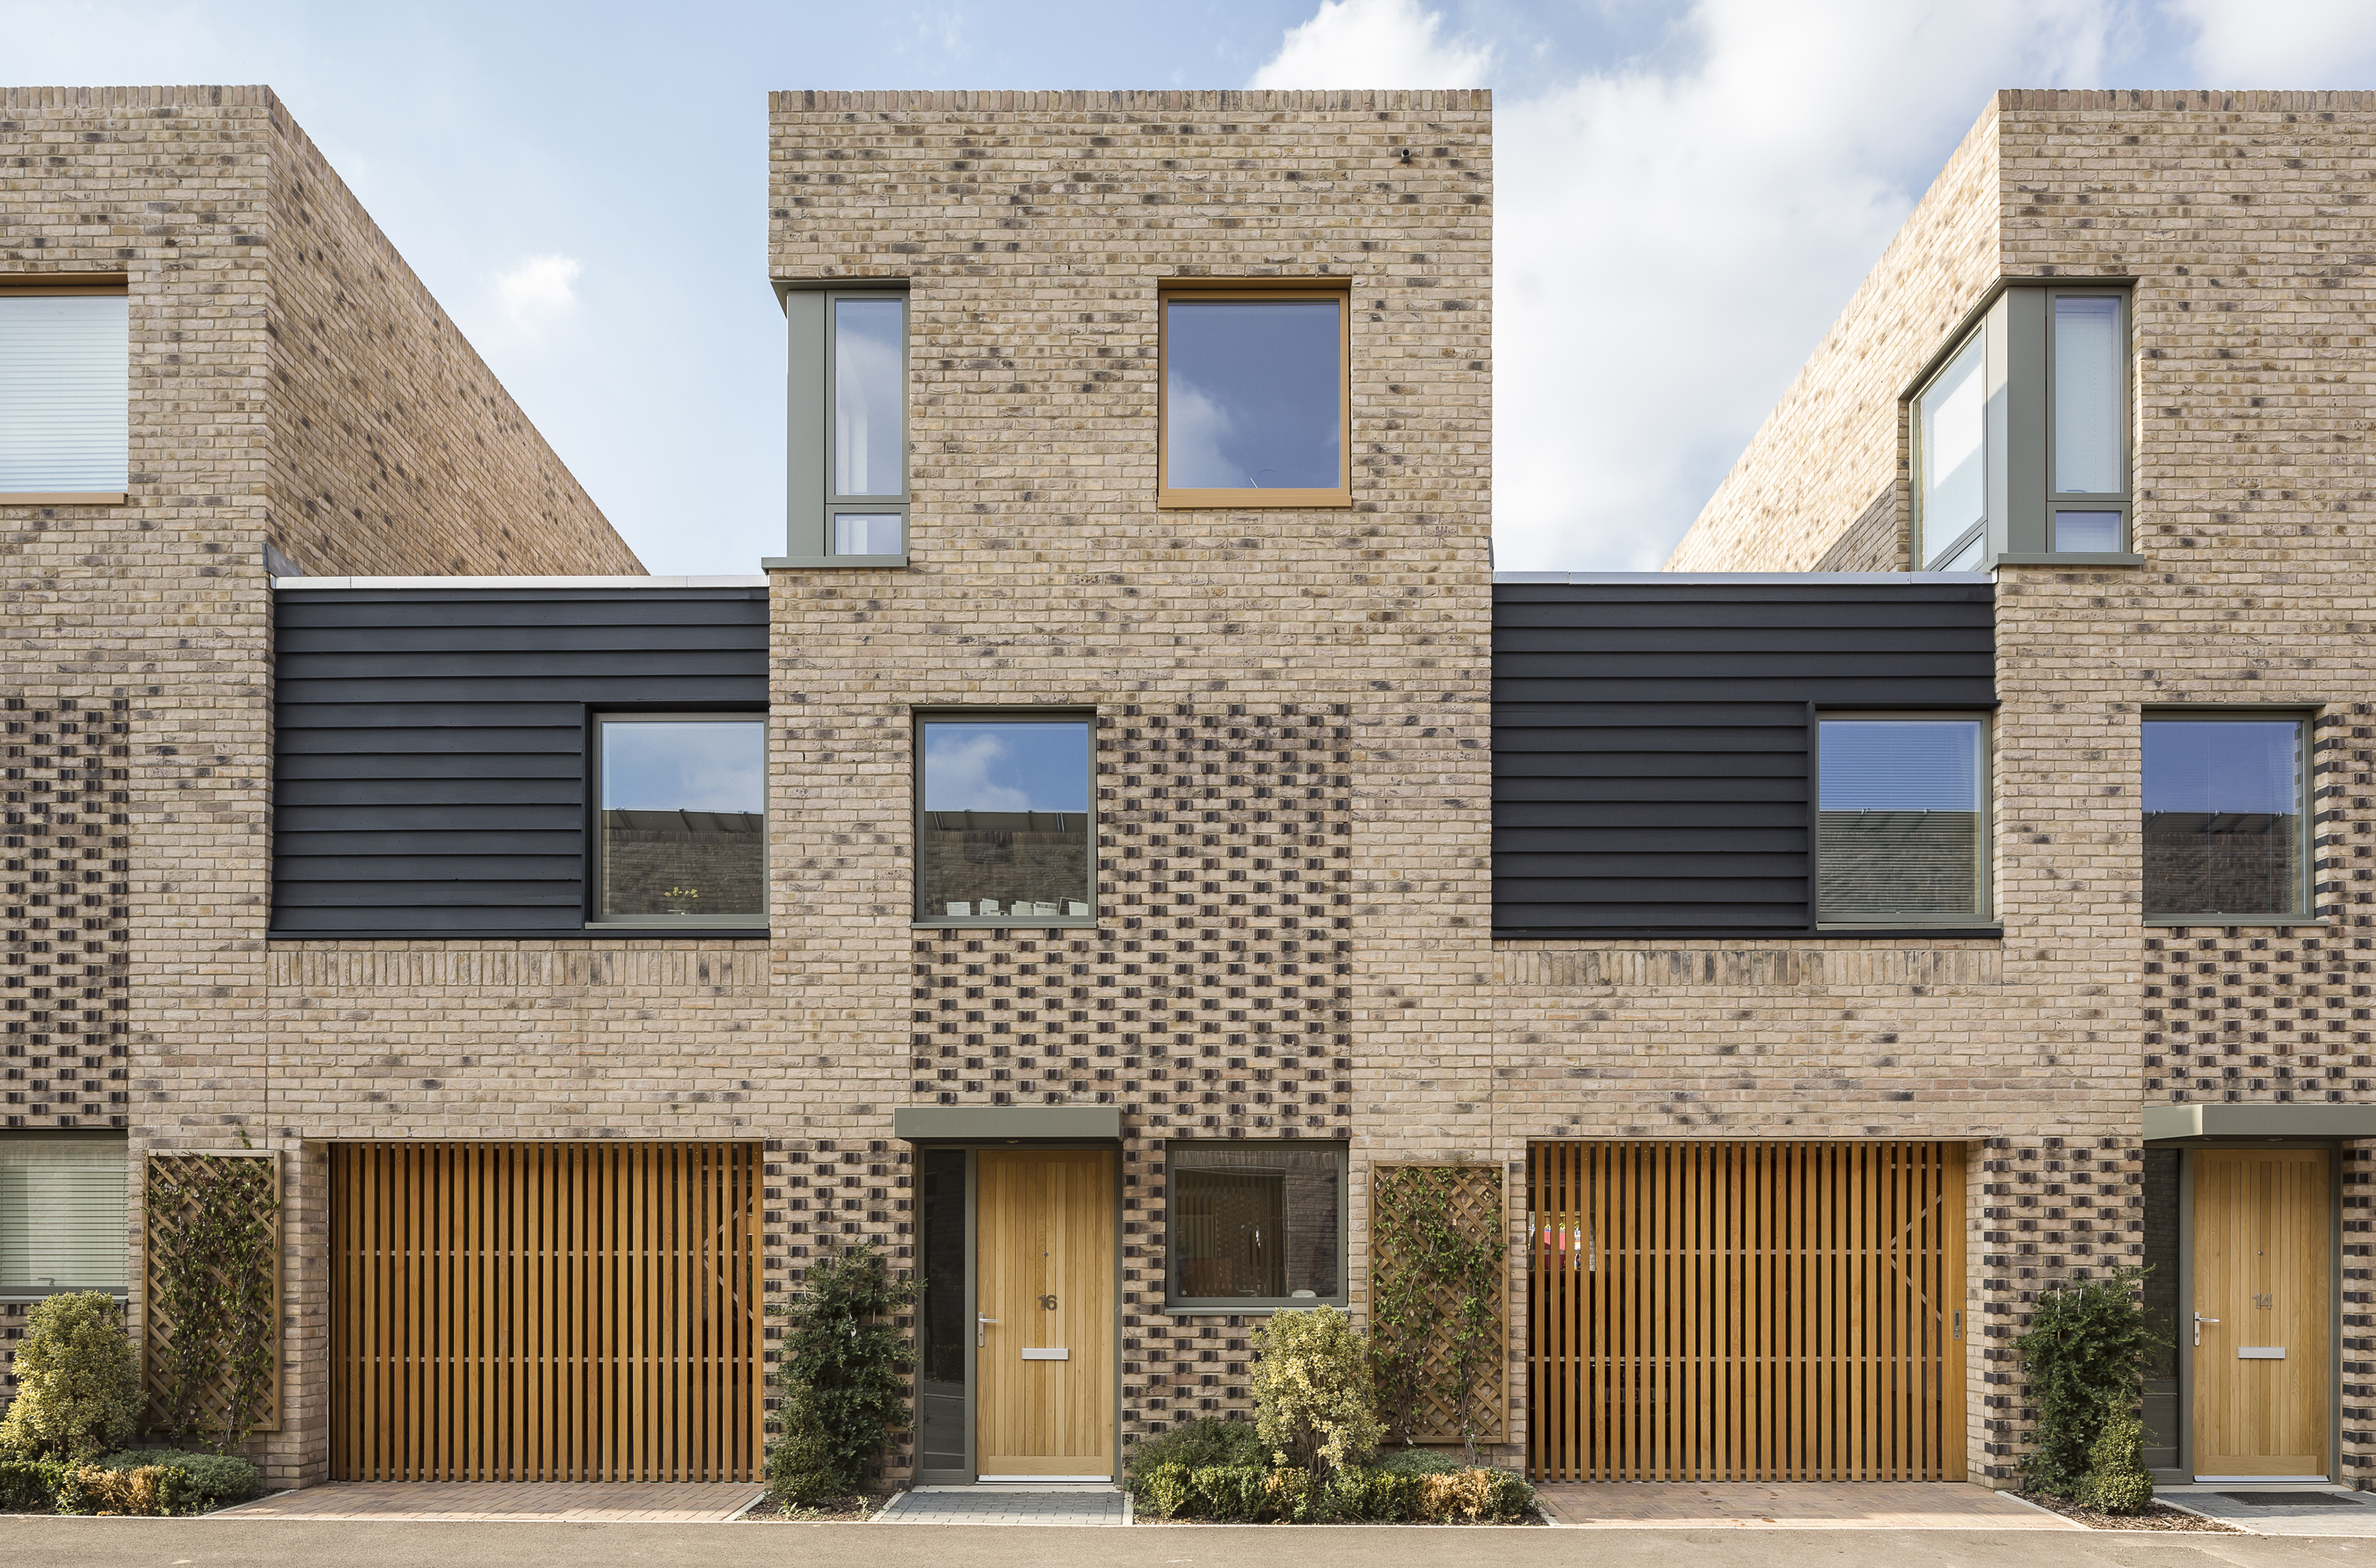 Abode at Great Kneighton shortlisted in Building Awards